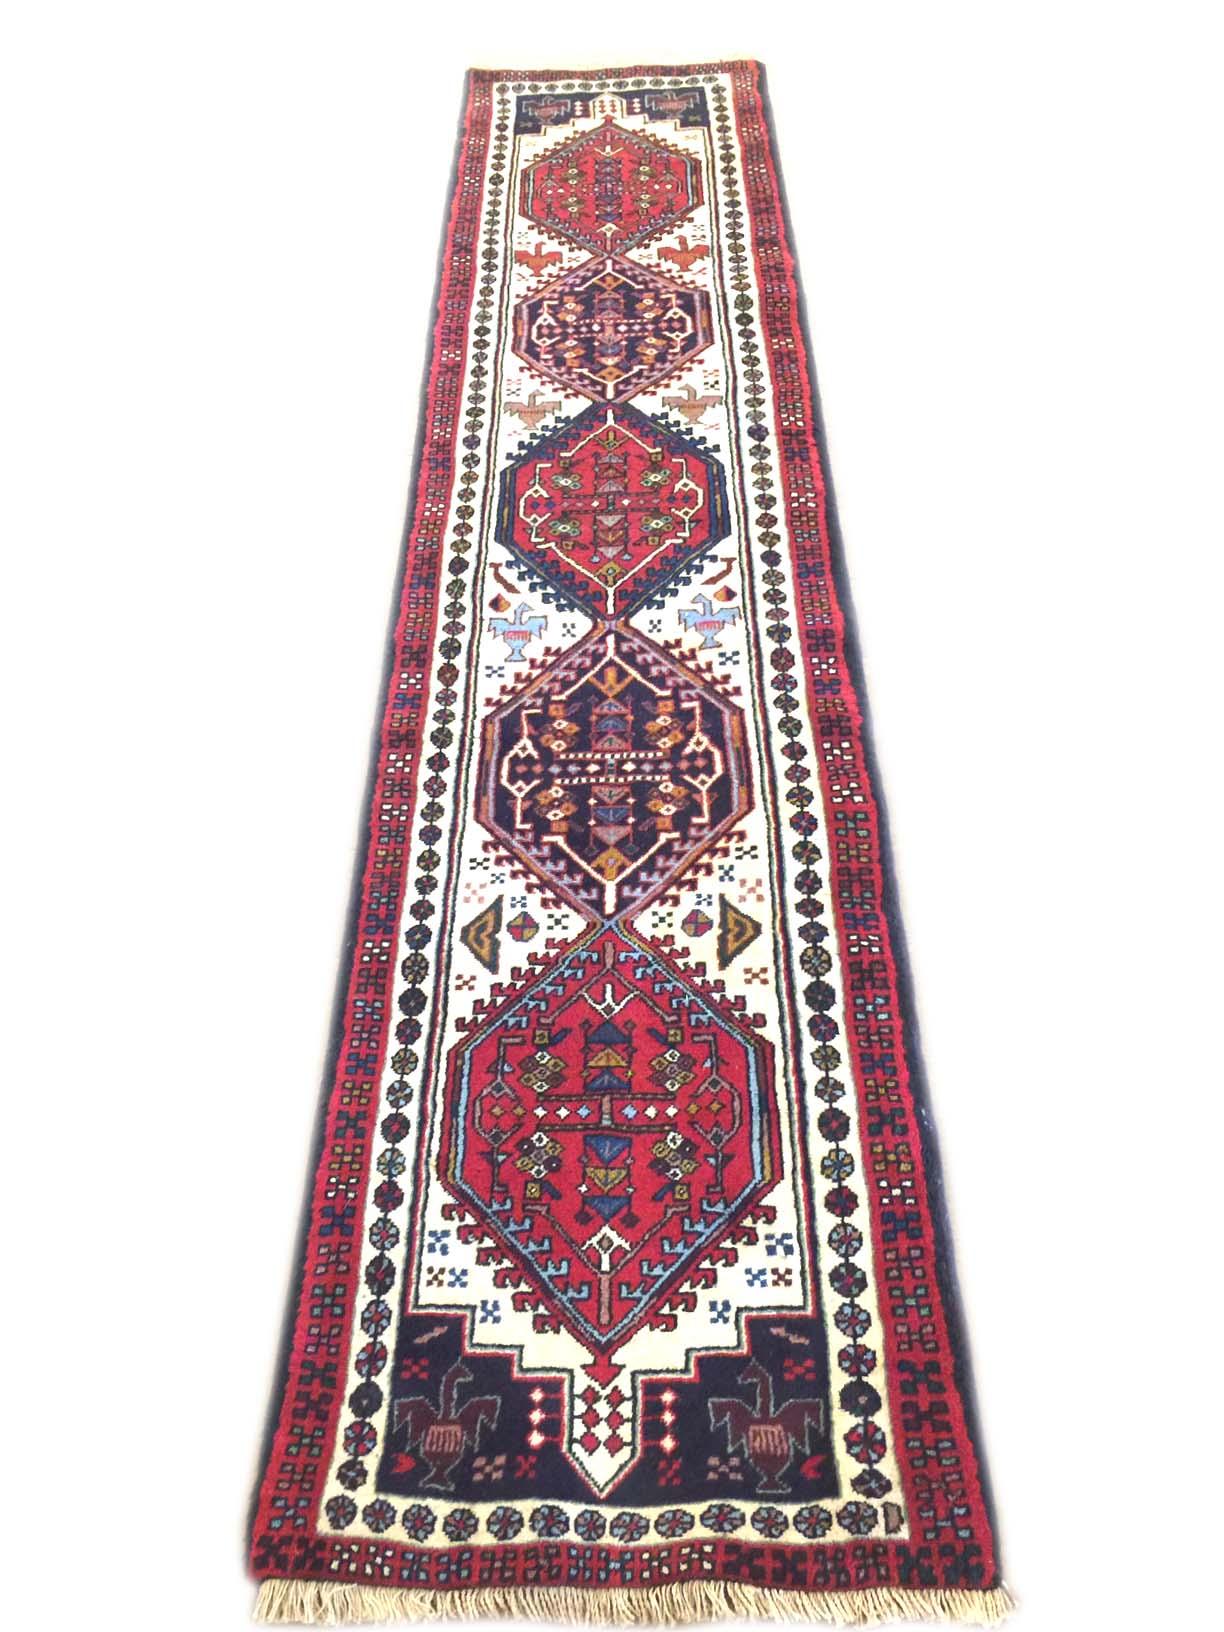 This runner is knotted in the province of Azarbayjan in north-west of Iran. The design is geometric with repeated medallion. The pile is wool with cotton foundation. The base color is cream and the border is red. The design and color combination can